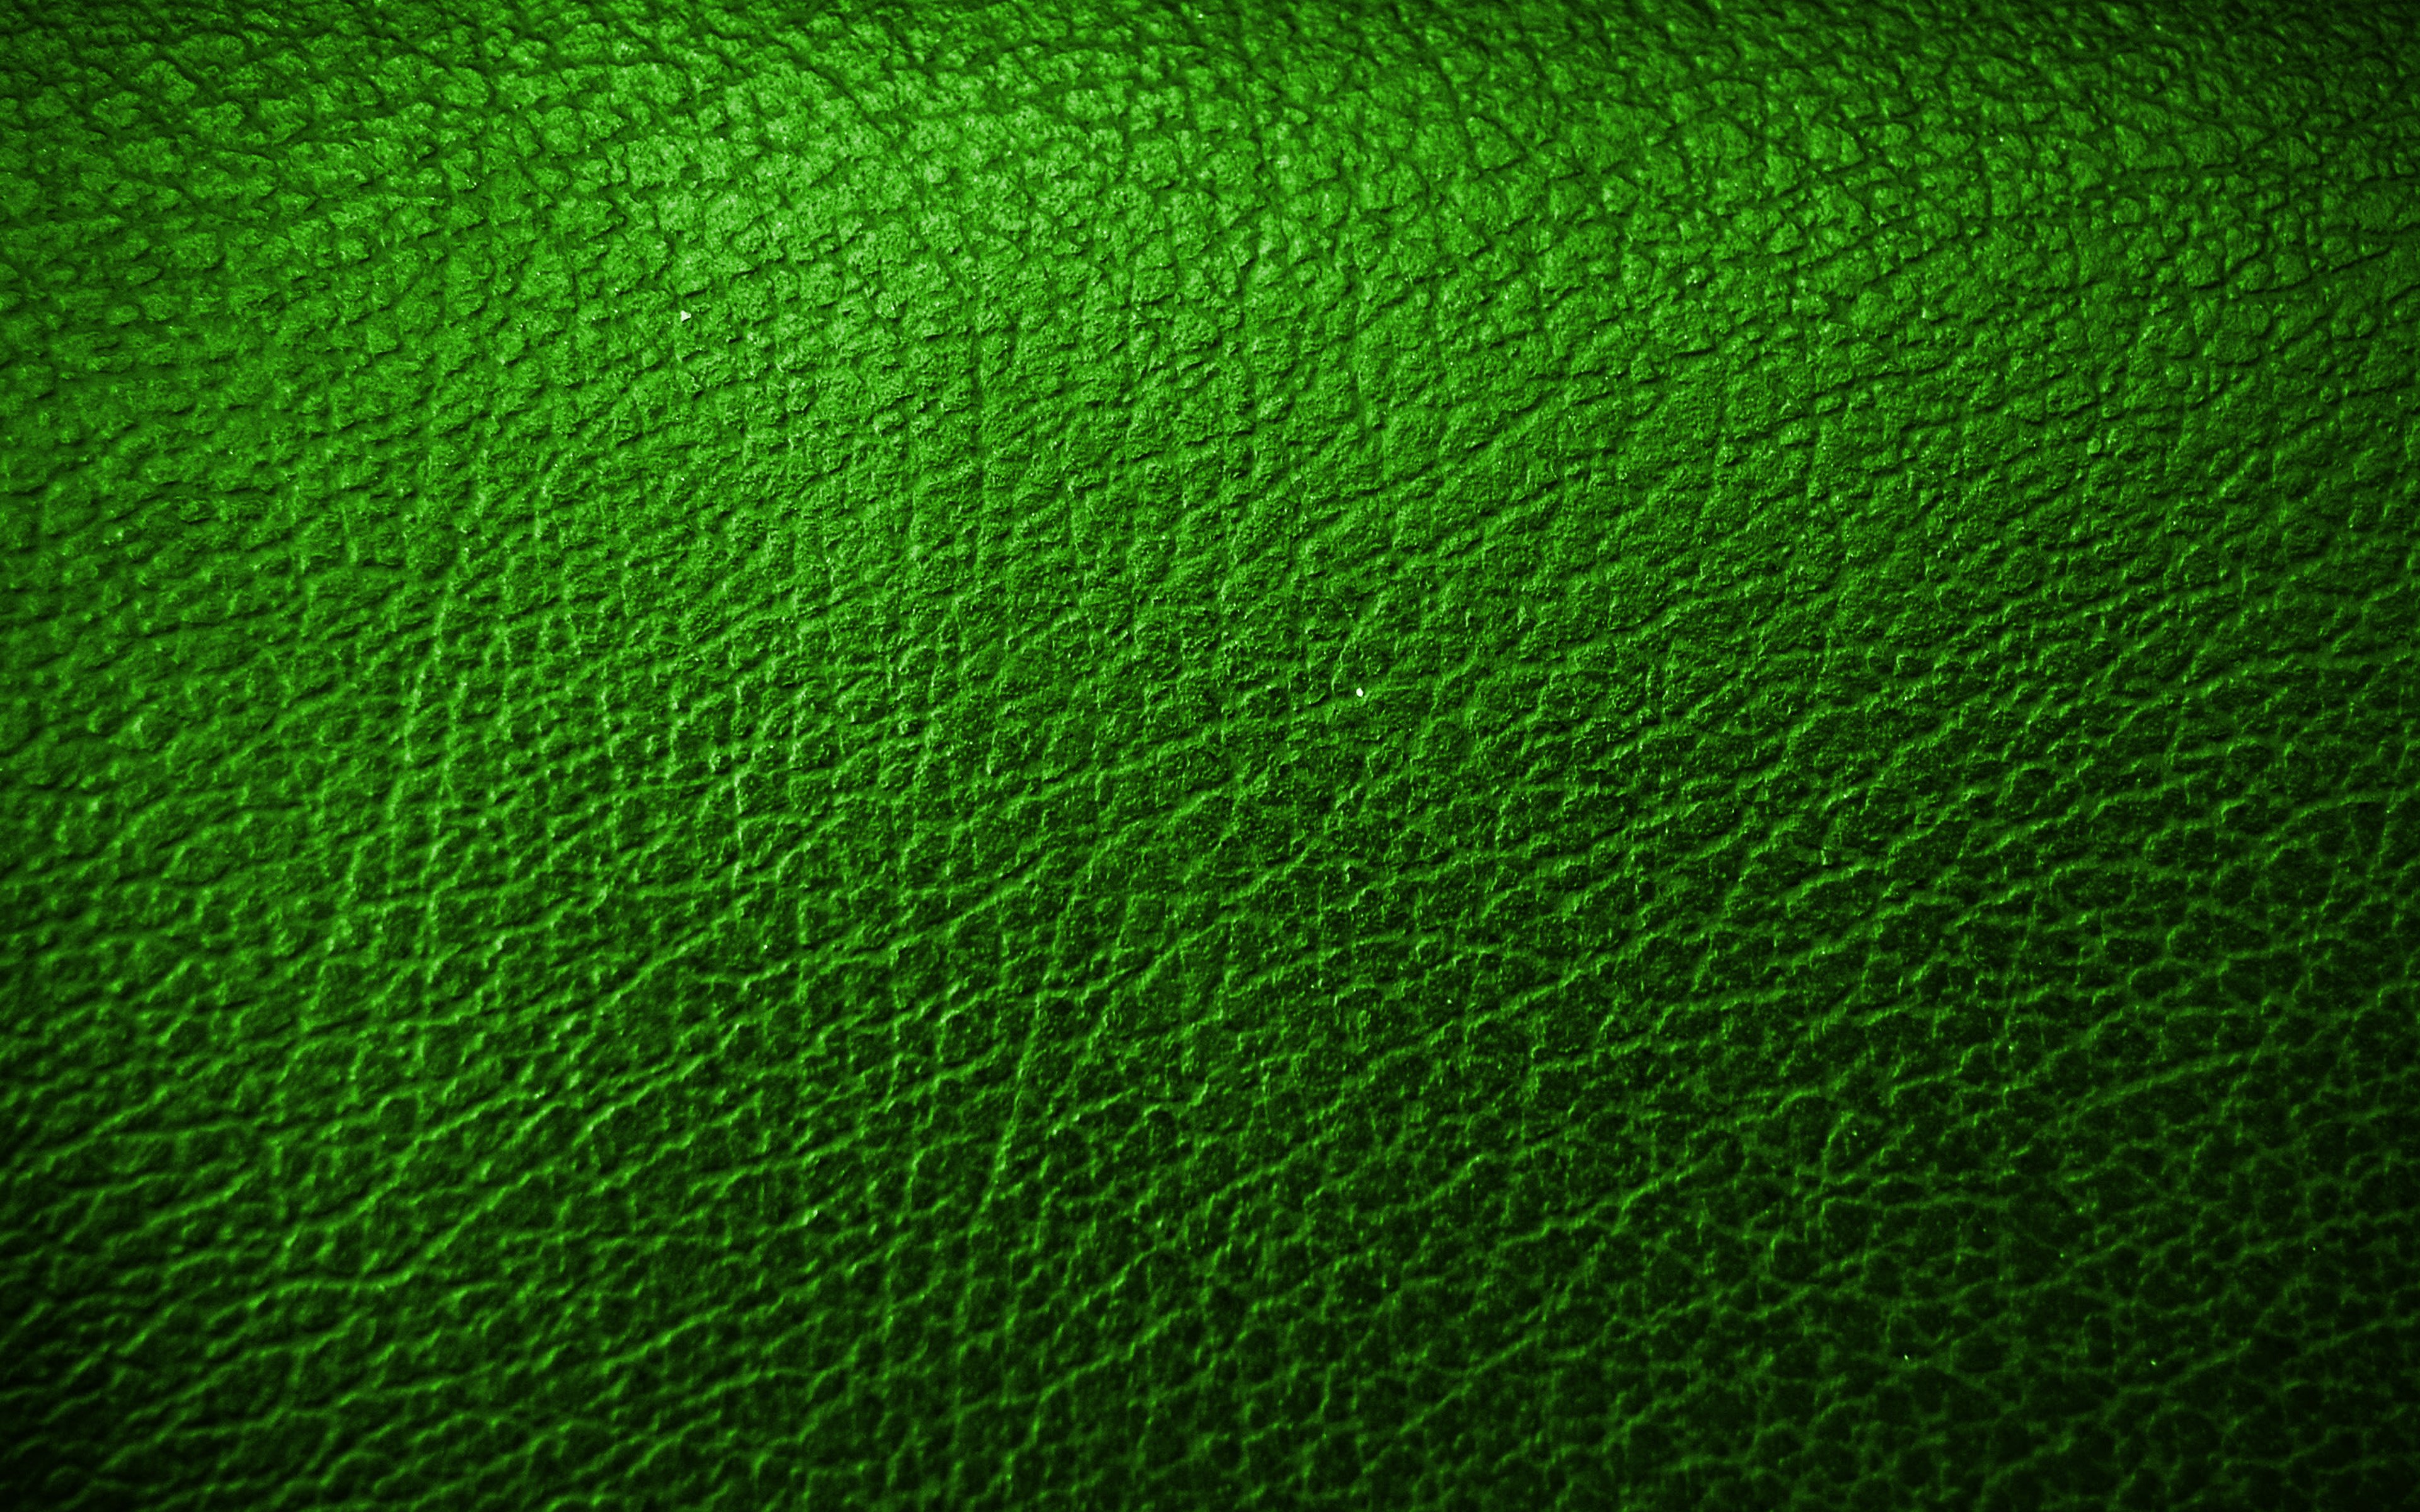 Download wallpaper green leather background, 4k, leather patterns, leather textures, green leather texture, green background, leather background, macro, leather for desktop with resolution 3840x2400. High Quality HD picture wallpaper